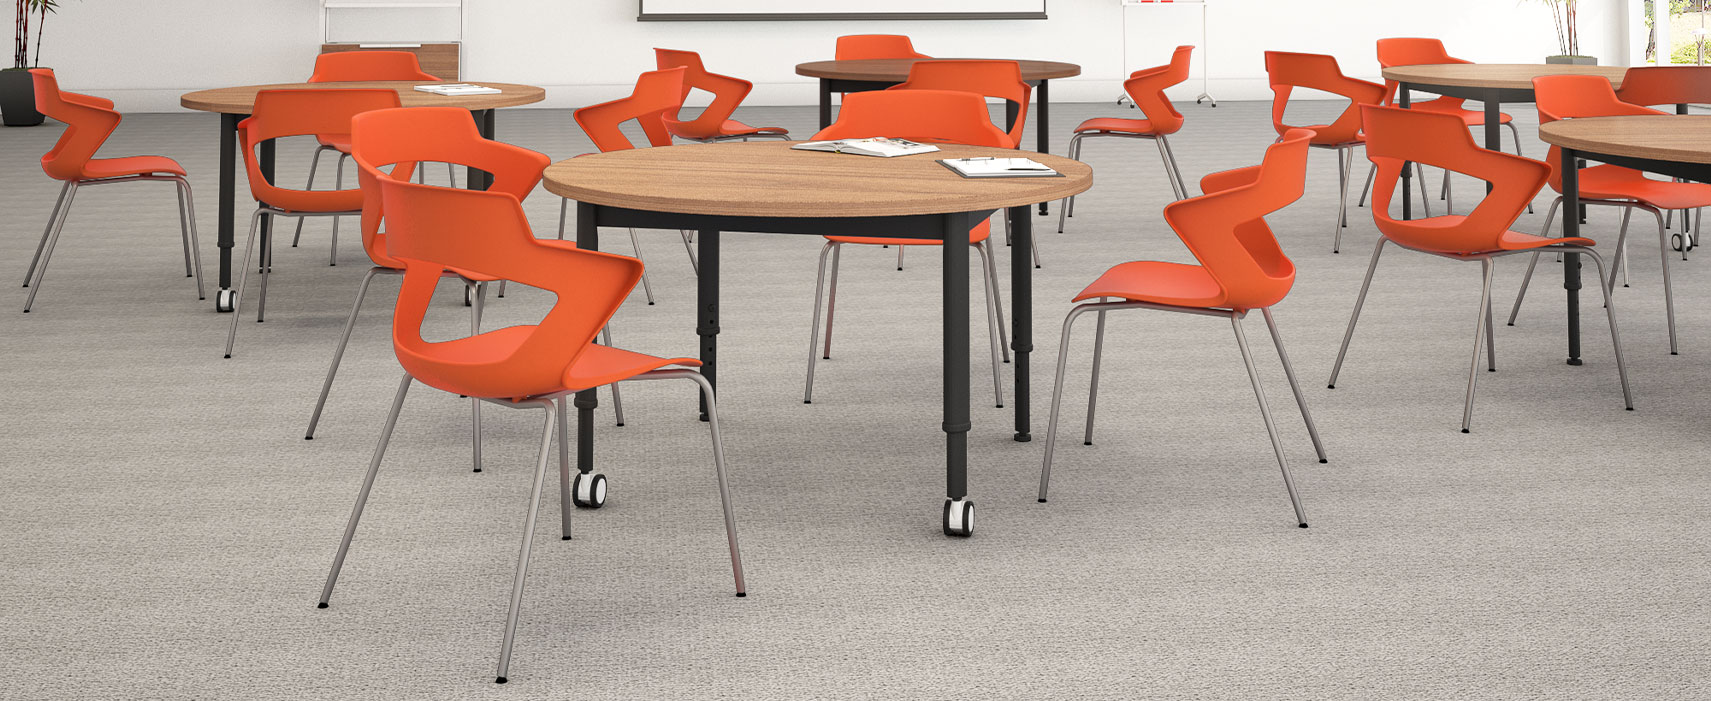 Training/Classroom featuring the Zee 4-leg chairs with orange shell.